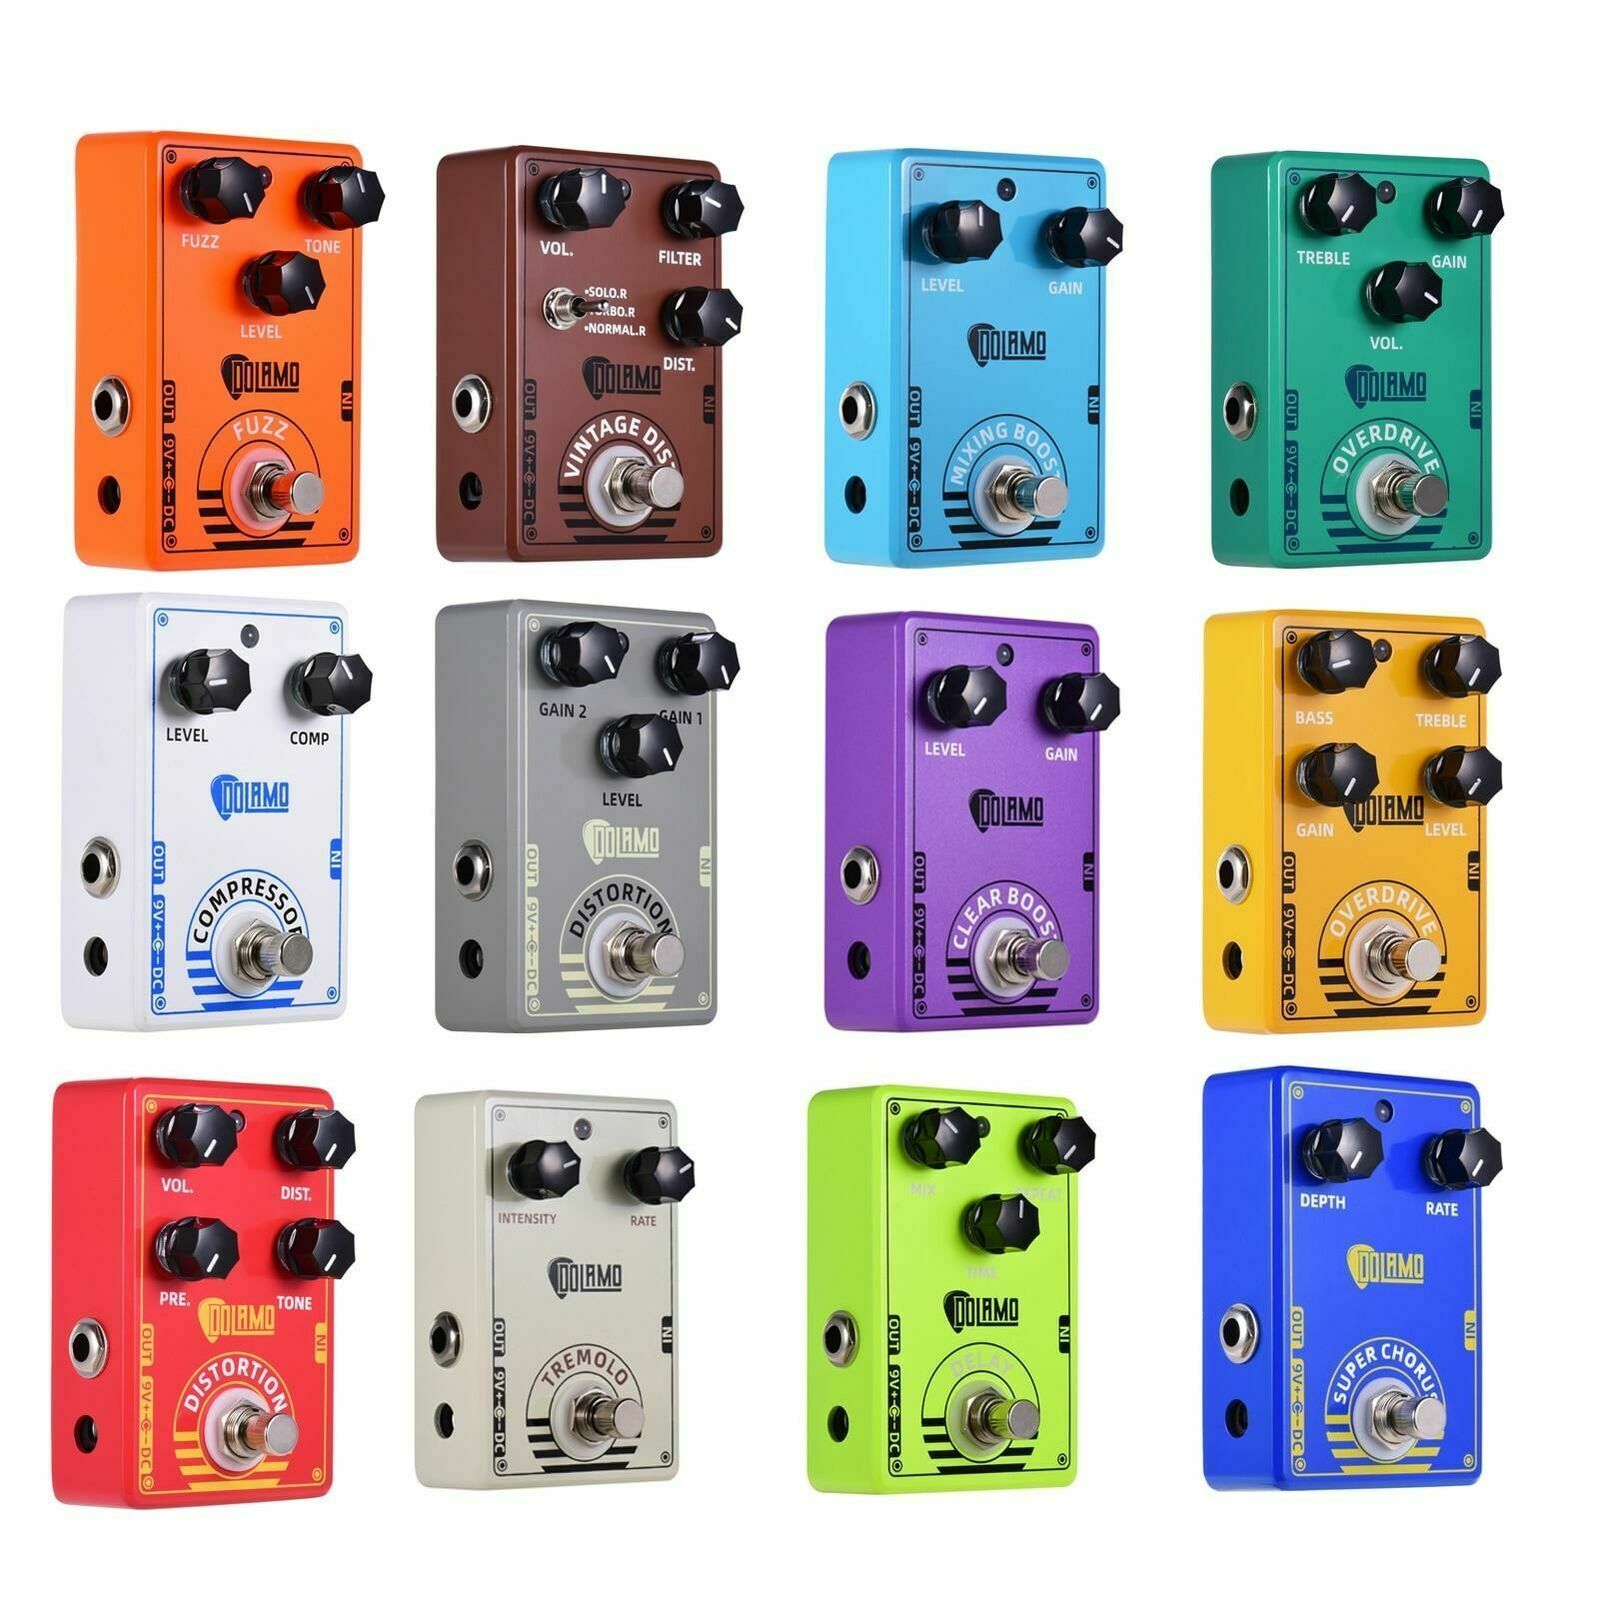 Dolamo Series Guitar Effect Pedals by Caline True Bypass USA Shipping Can Prices - $26.97